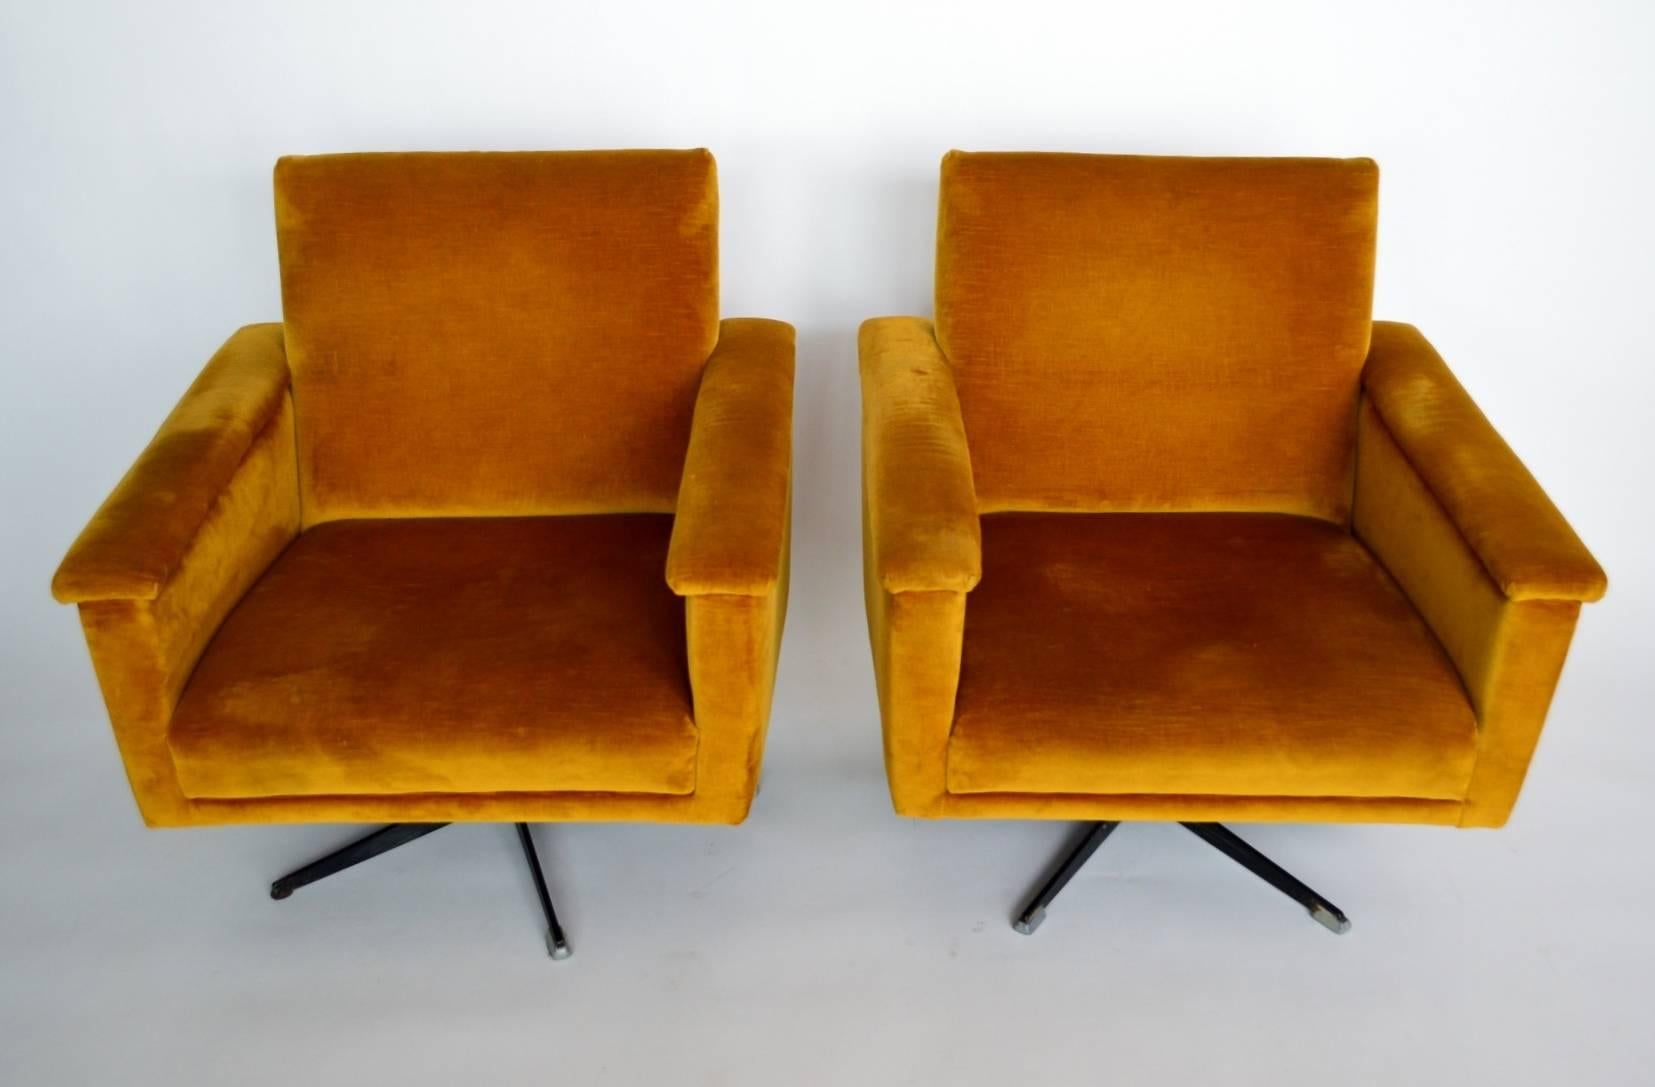 Beautiful set of two vintage Swiss swivel club chairs or lounge chairs with strong star-shaped base.
The form is a typical 